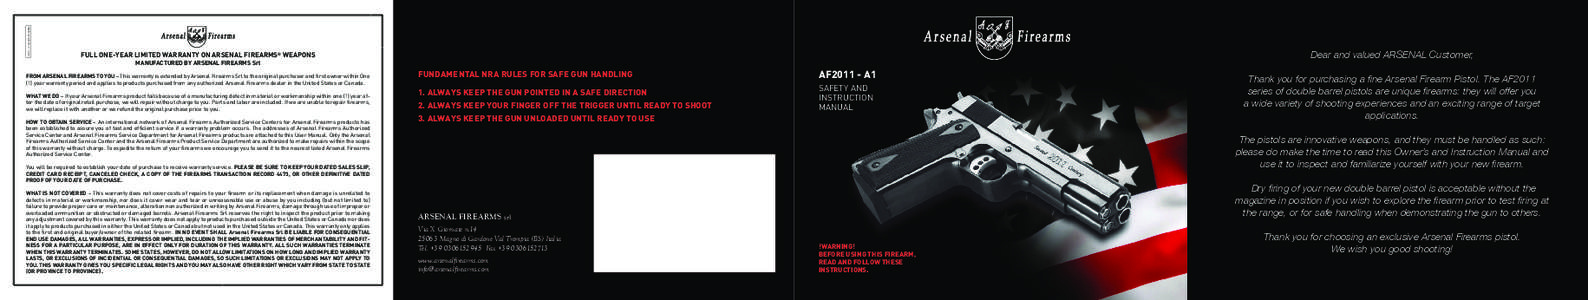 AF2011-A1/LS/MC-2013ENG  Dear and valued ARSENAL Customer, FULL ONE-YEAR LIMITED WARRANTY ON ARSENAL FIREARMS® WEAPONS MANUFACTURED BY ARSENAL FIREARMS Srl